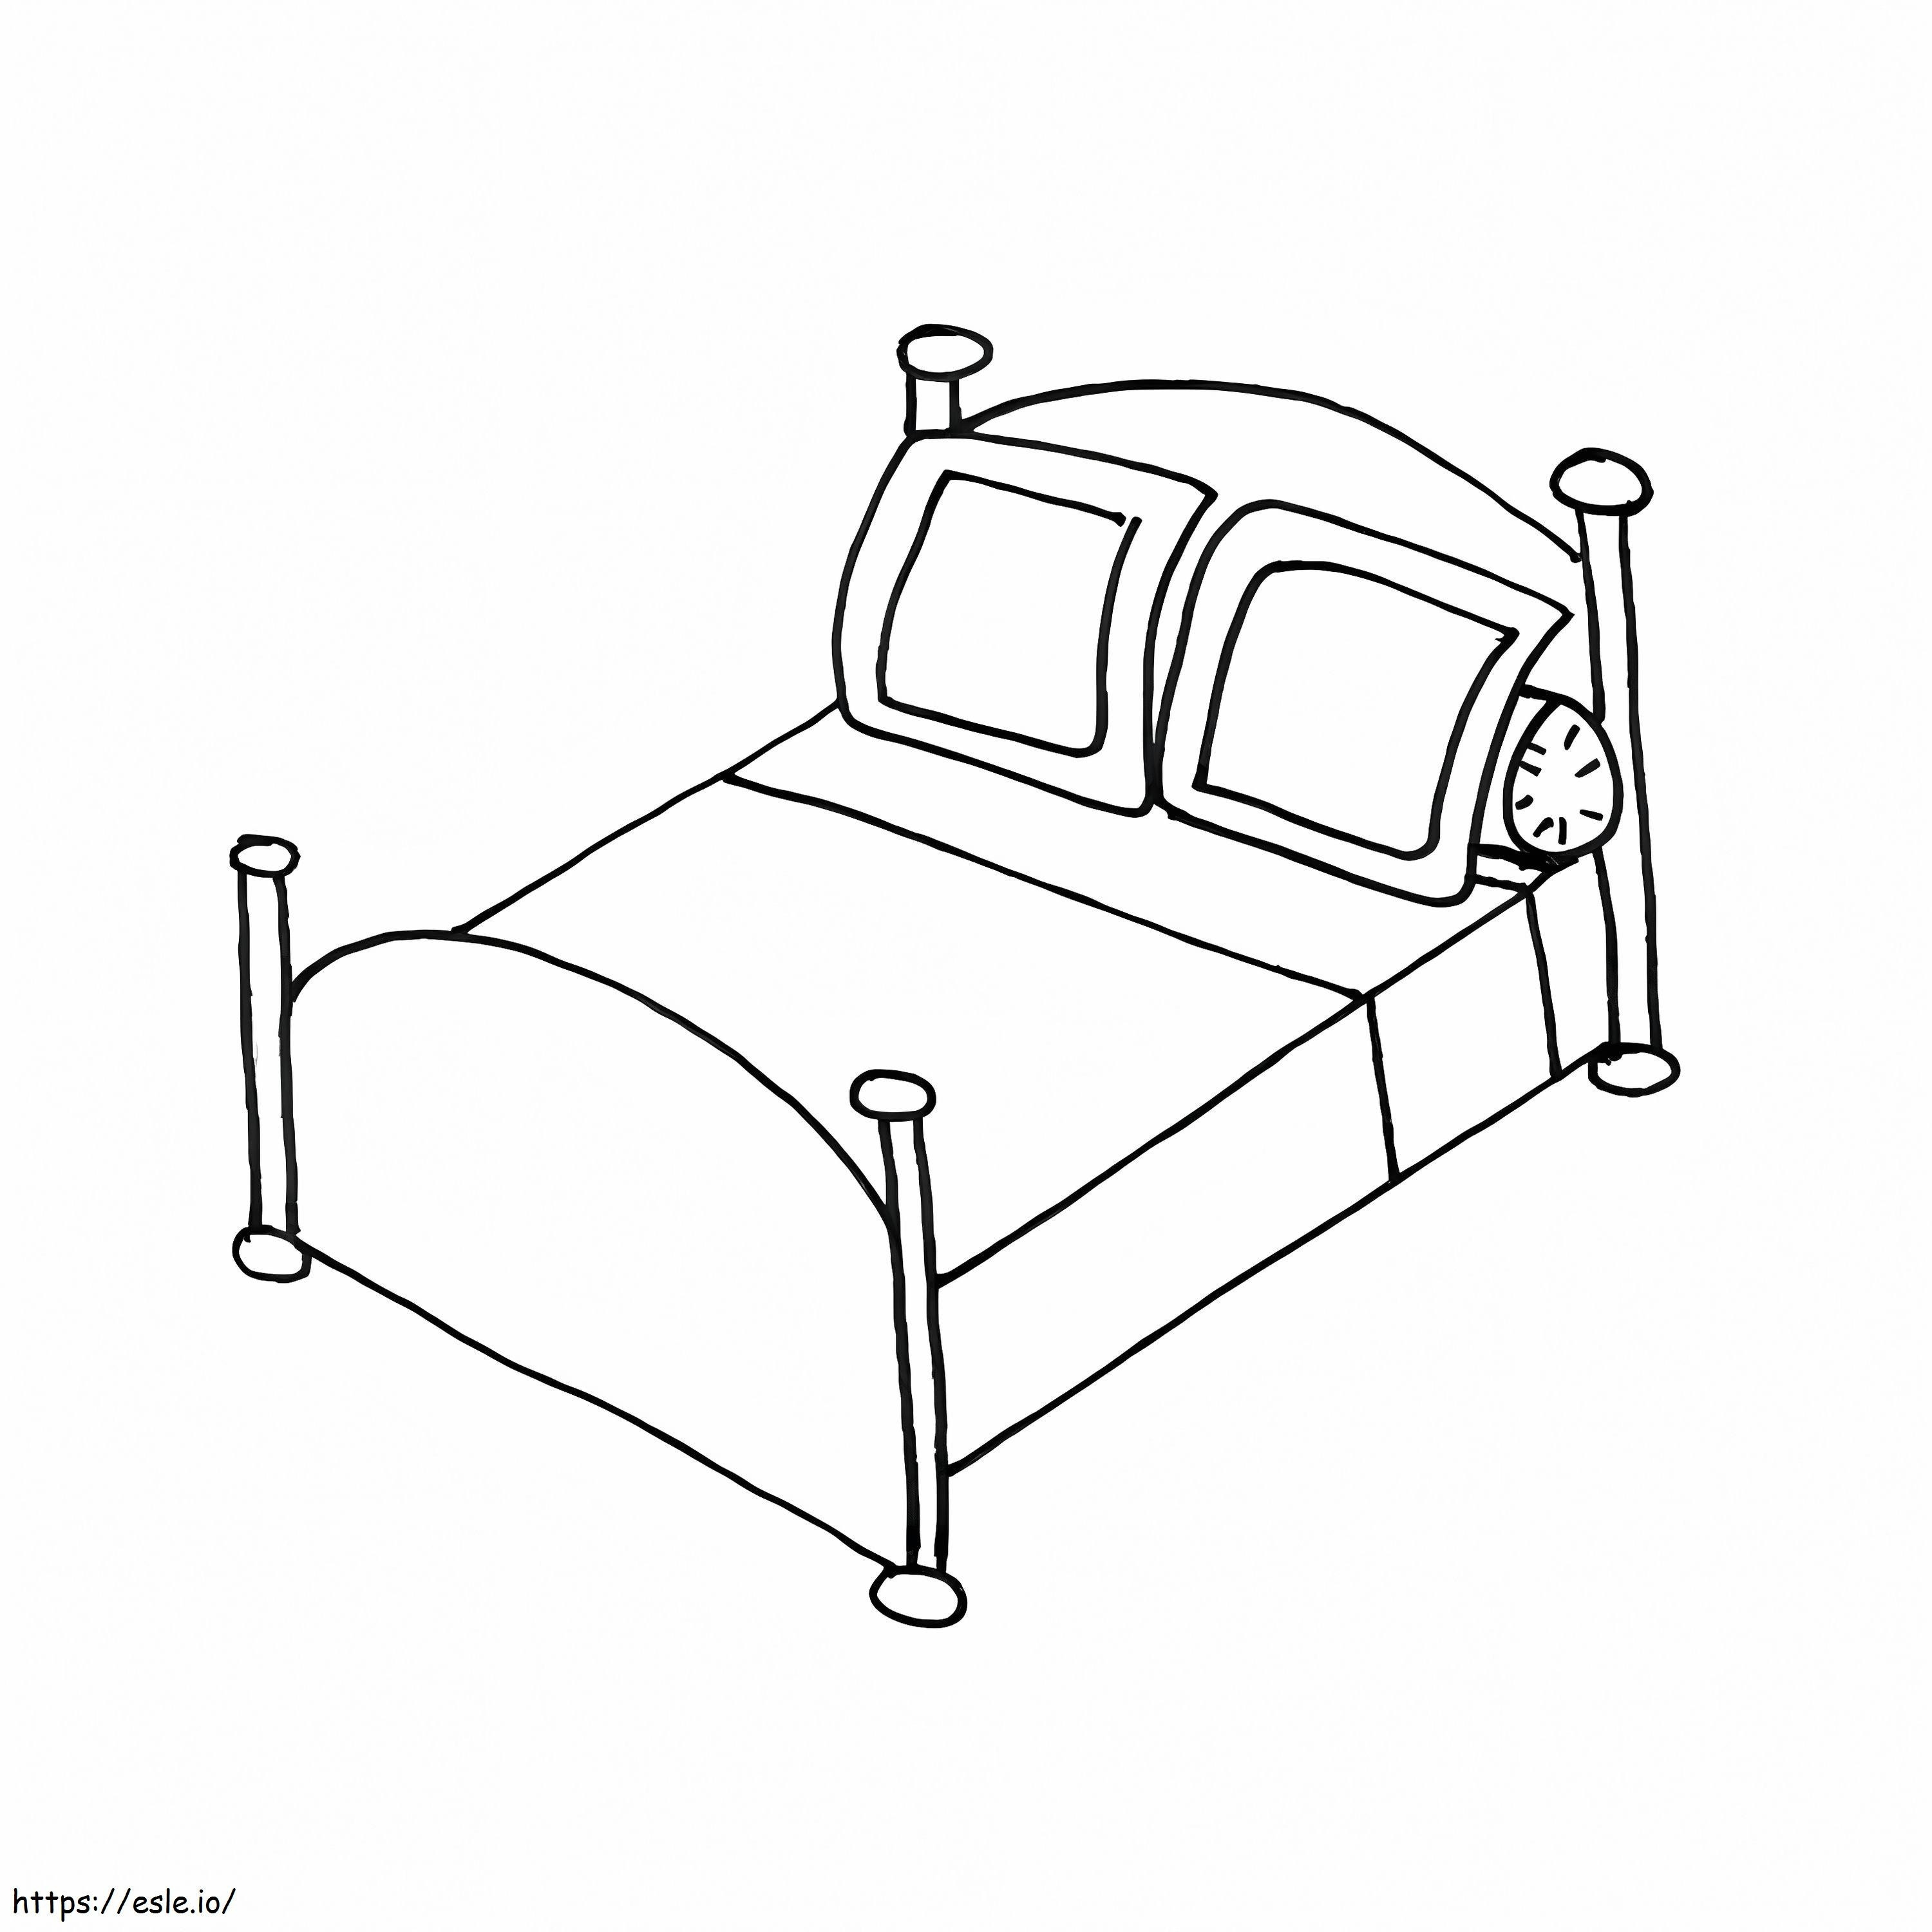 Bed 7 coloring page